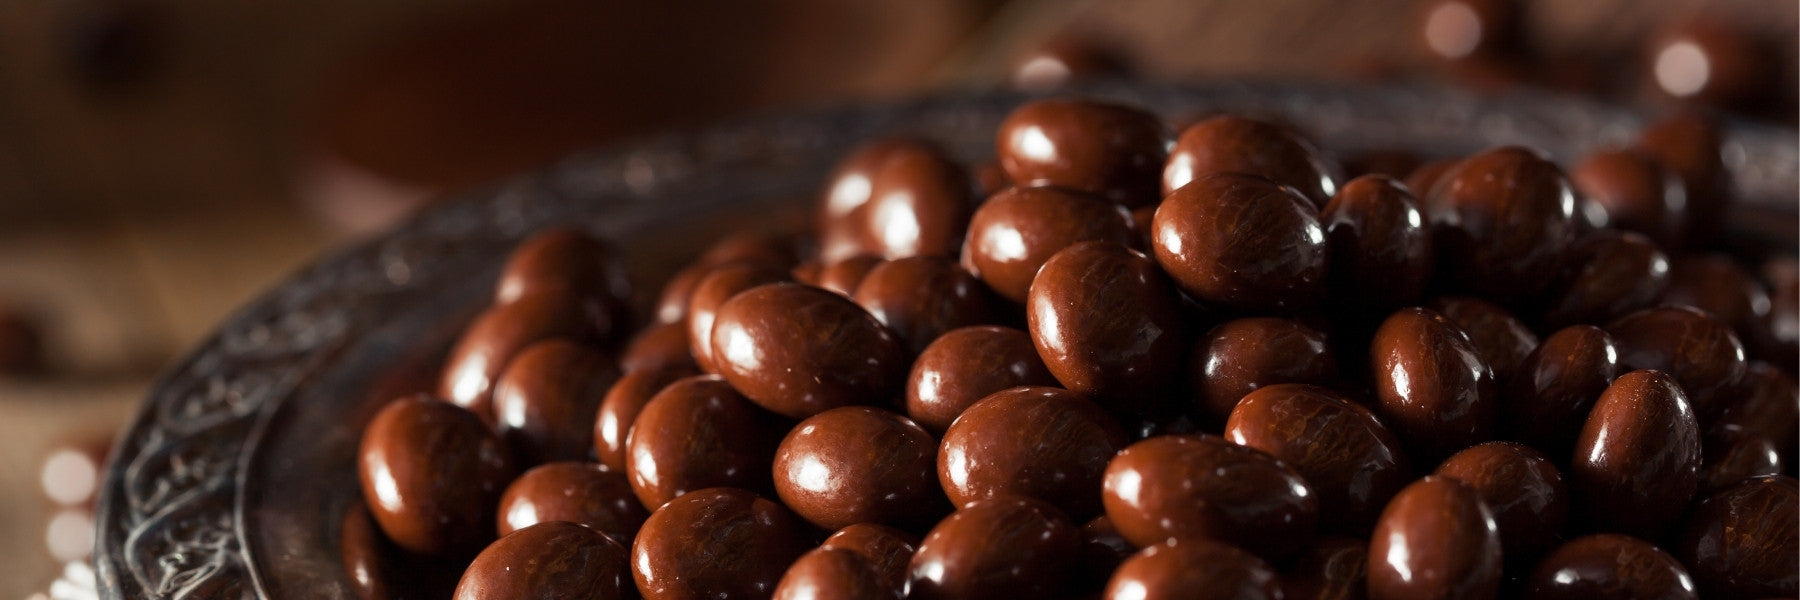 Dilettante Chocolates Dark chocolate covered espresso beans made with real espresso bean centers